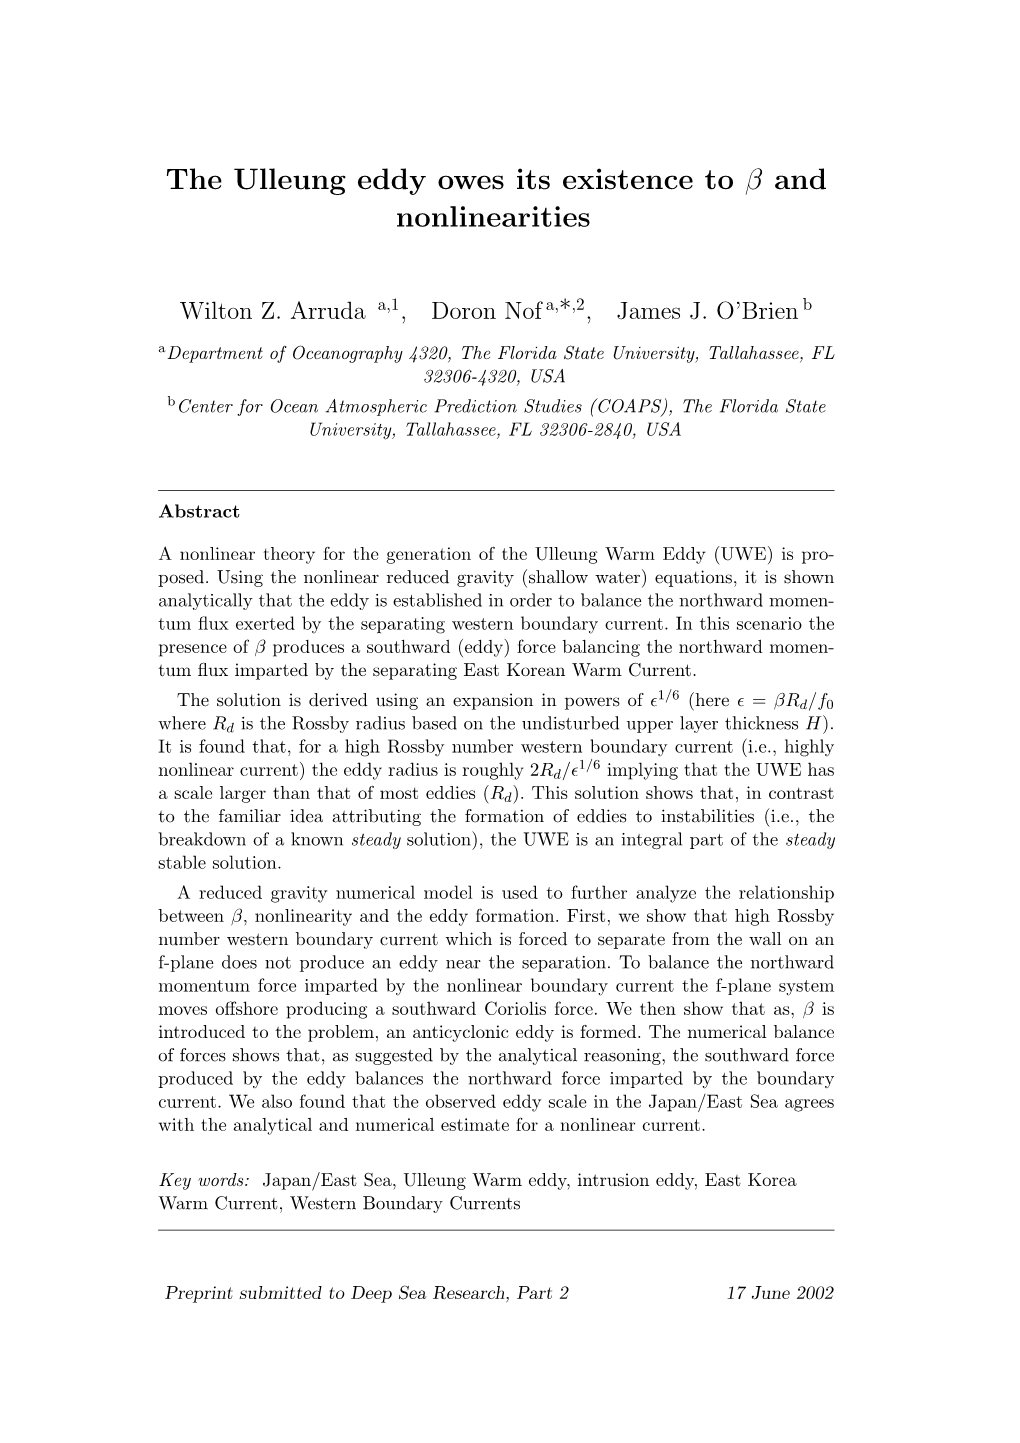 The Ulleung Eddy Owes Its Existence to Β and Nonlinearities